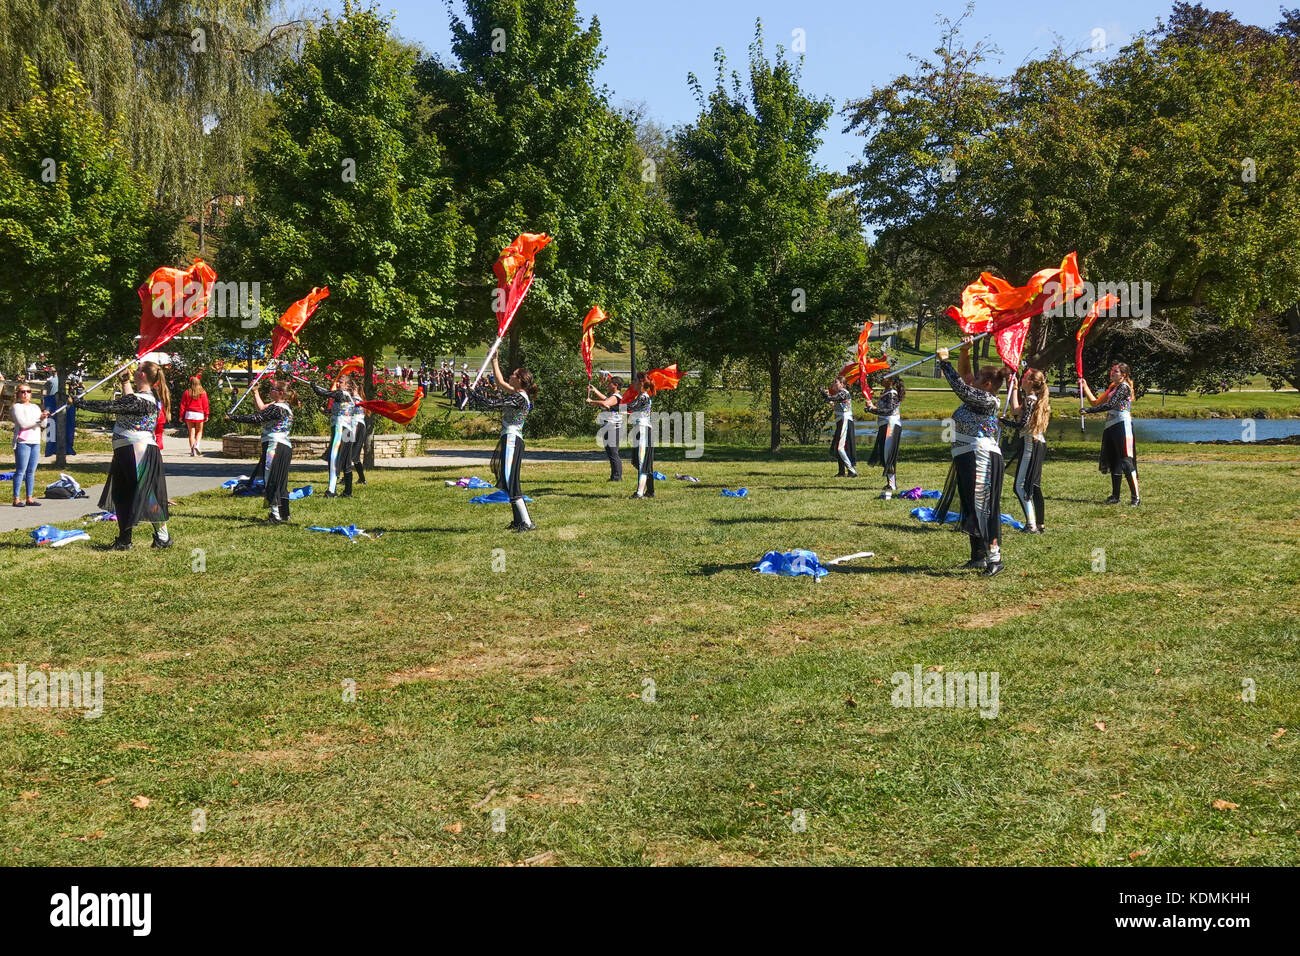 Marching bands, practising for competition at Muhlerberg college, Allentown, Pennsylvania, United states. Stock Photo